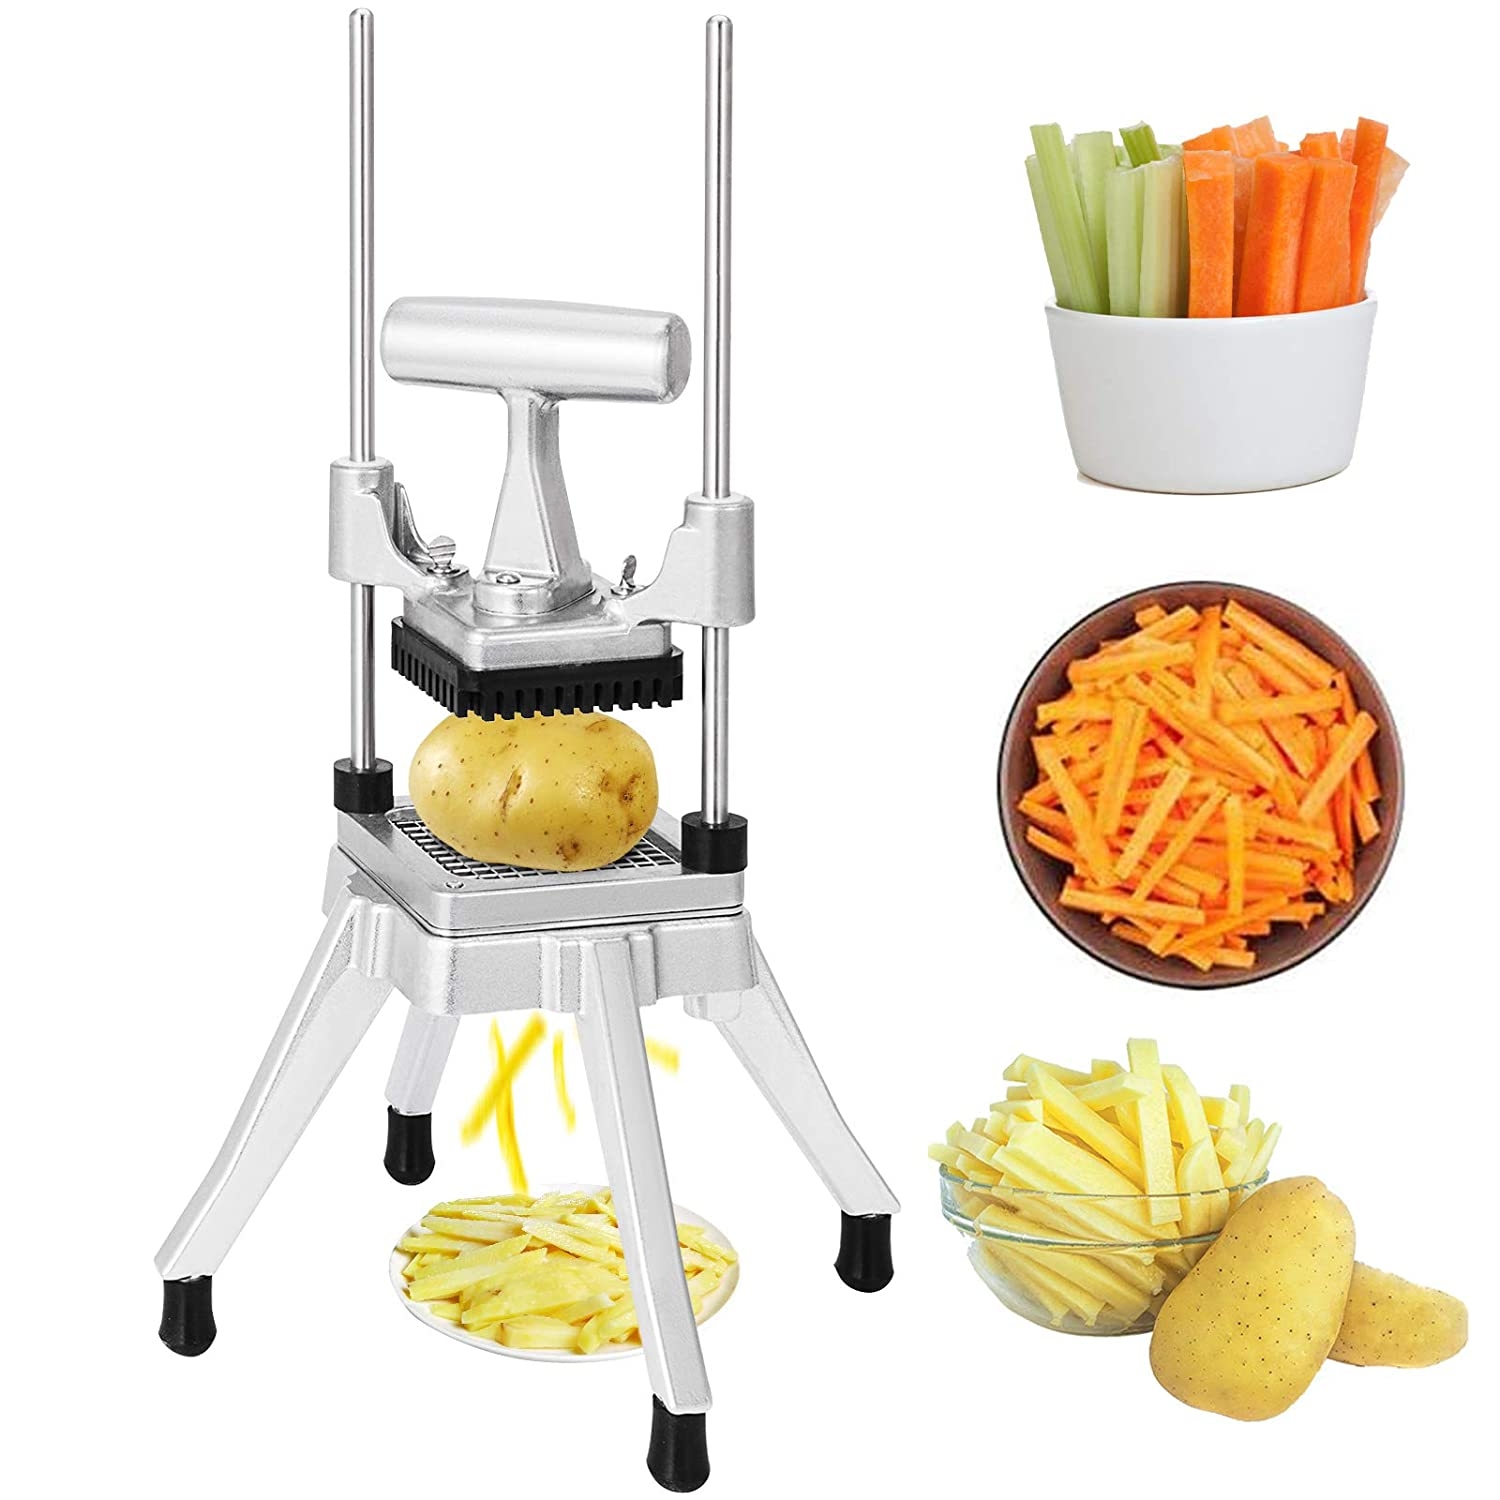 Happybuy Commercial Vegetable Fruit Chopper 1/4″ Blade Heavy Duty Professional Food Dicer Kattex French Fry Cutter Onion Slicer